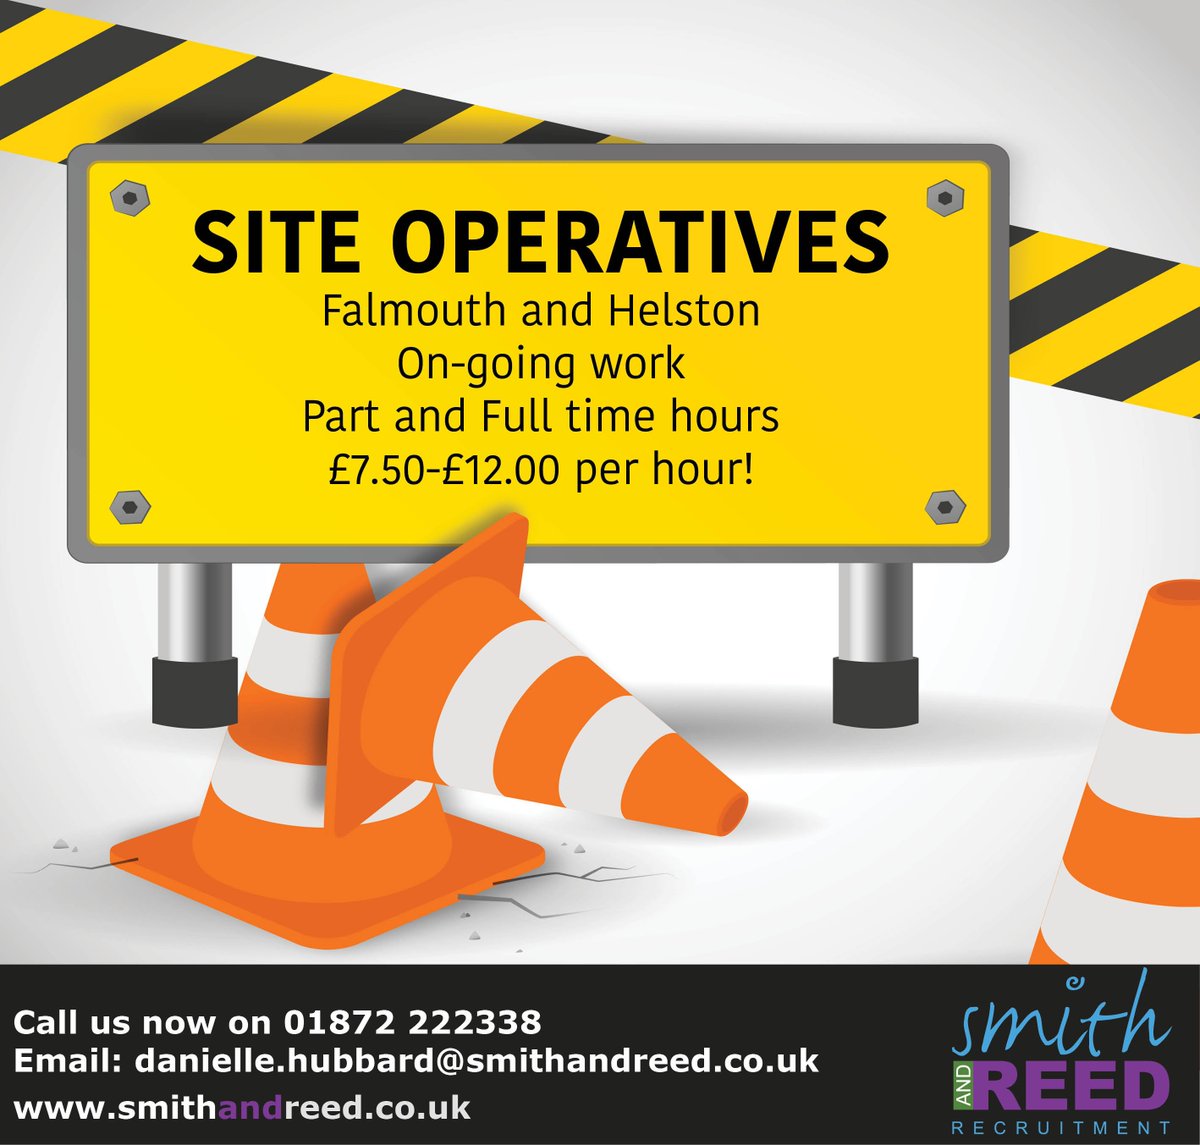 On-going work available in Falmouth and Helston! #ongoingwork #JobsinCornwall #hiring #siteoperatives